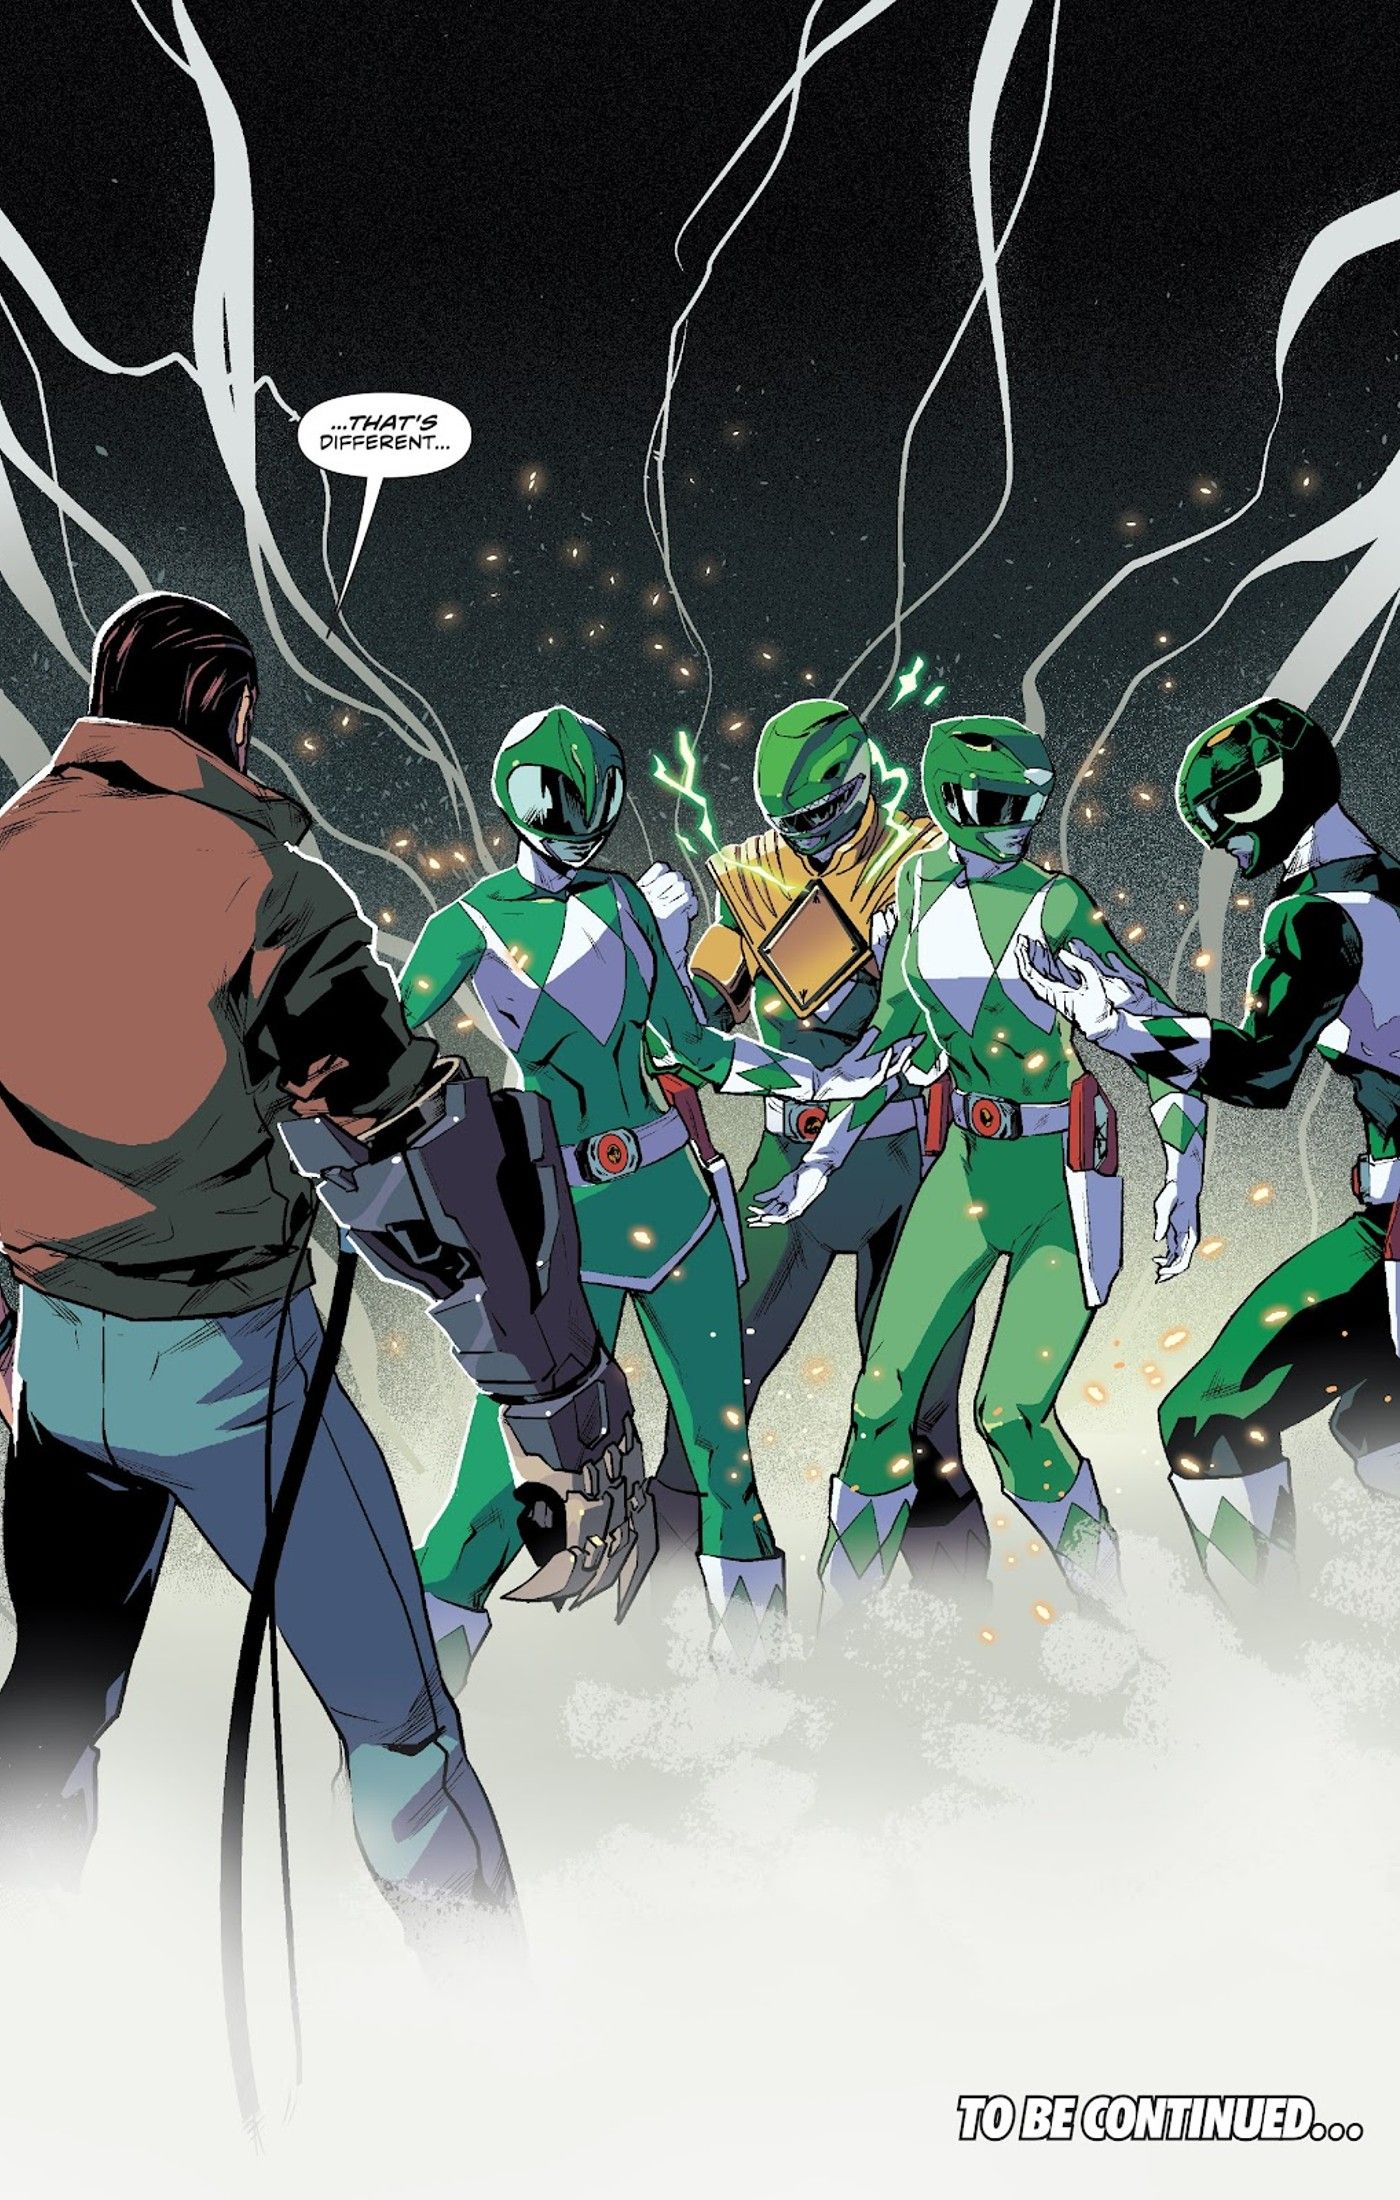 Tommy Oliver gives his Green Ranger powers to the Mighty Morphin Power Rangers